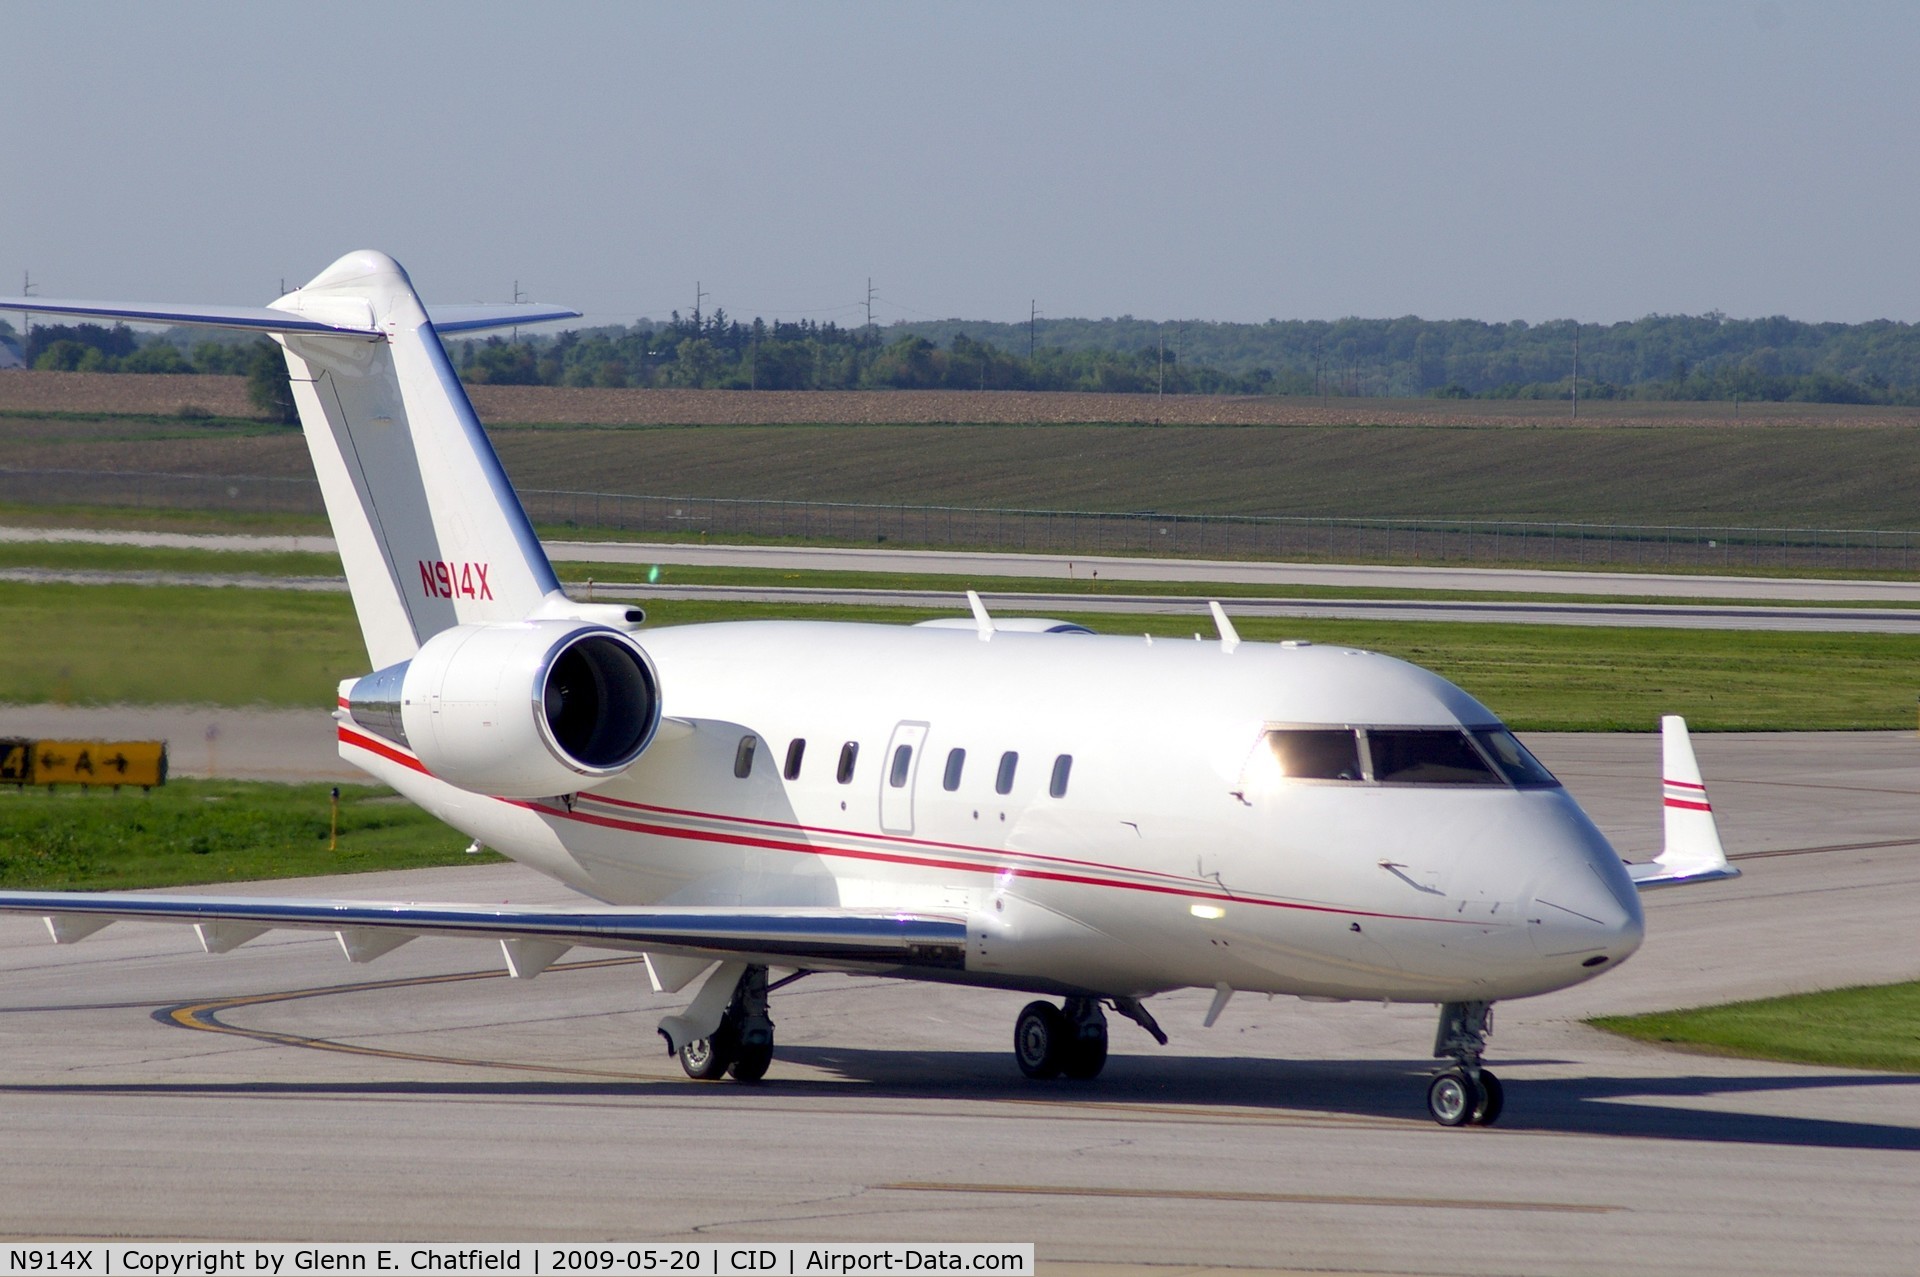 N914X, 1995 Canadair Challenger 601-3R (CL-600-2B16) C/N 5185, Turning onto Delta taxiway on the way to Landmark